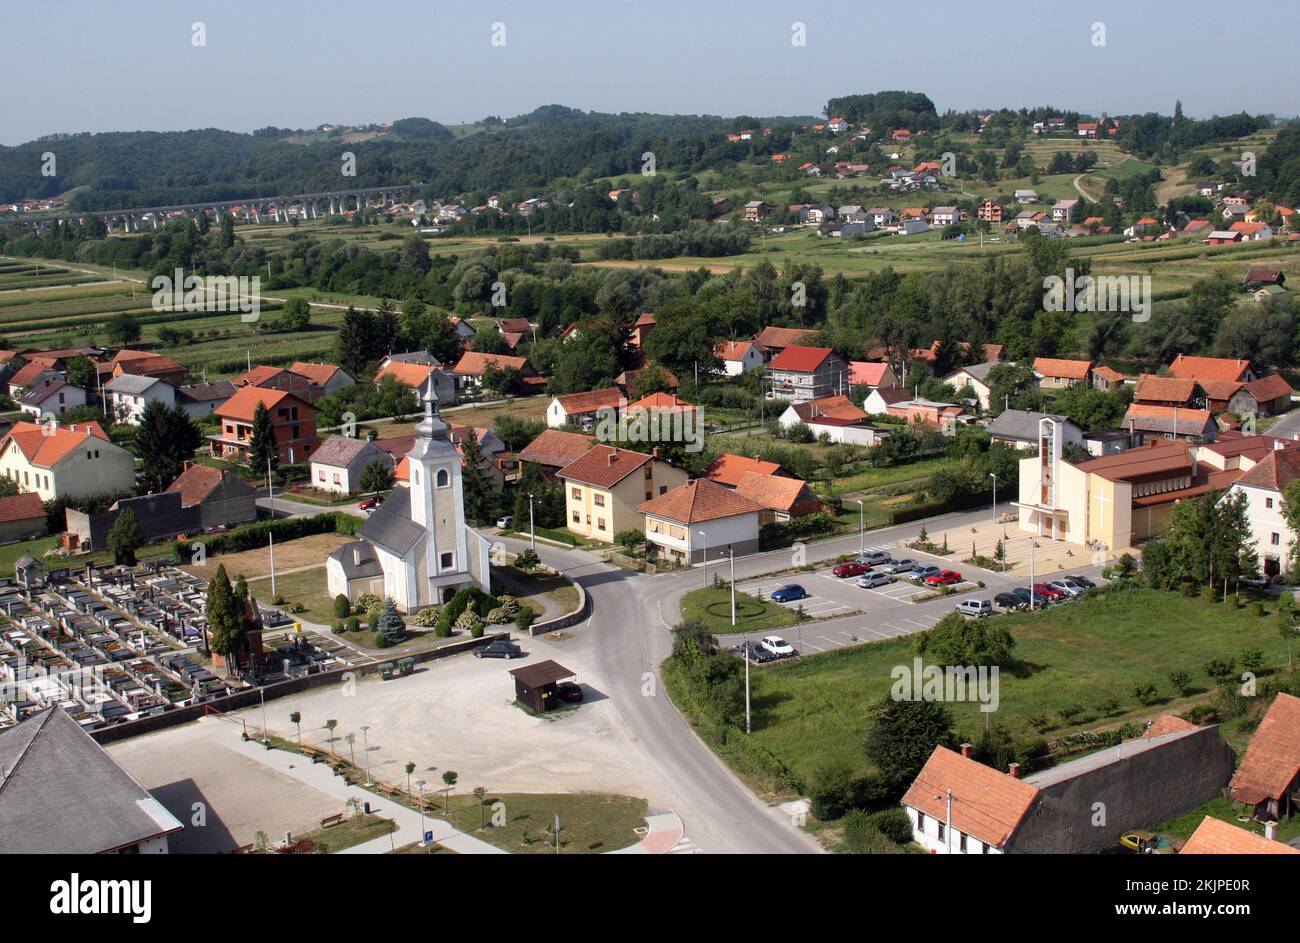 Parish Church of St. Martin and the Pastoral Center in Hrnetic, Karlovac, Croatia Stock Photo